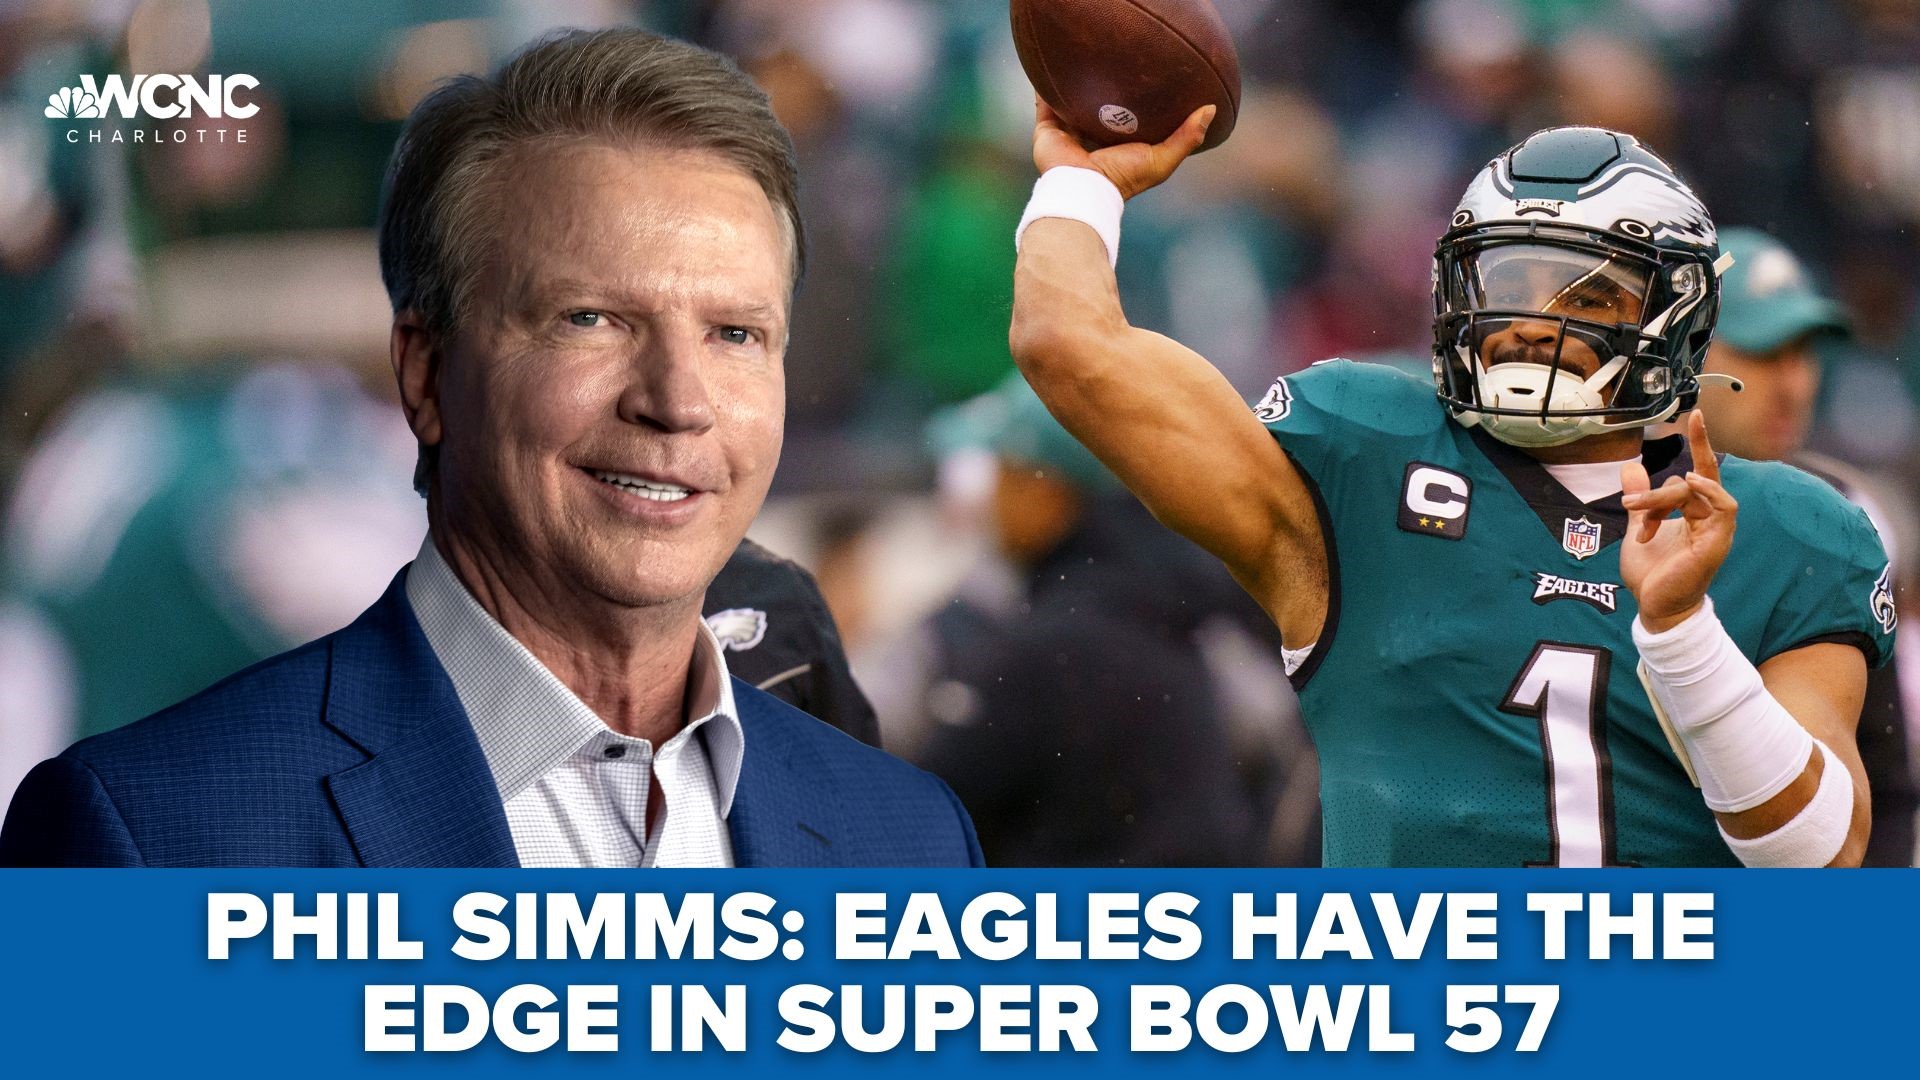 Former Super Bowl MVP Phil Simms previews Super Bowl 57 and explains why the Philadelphia Eagles have an early edge over Patrick Mahomes and the Kansas City Chiefs.